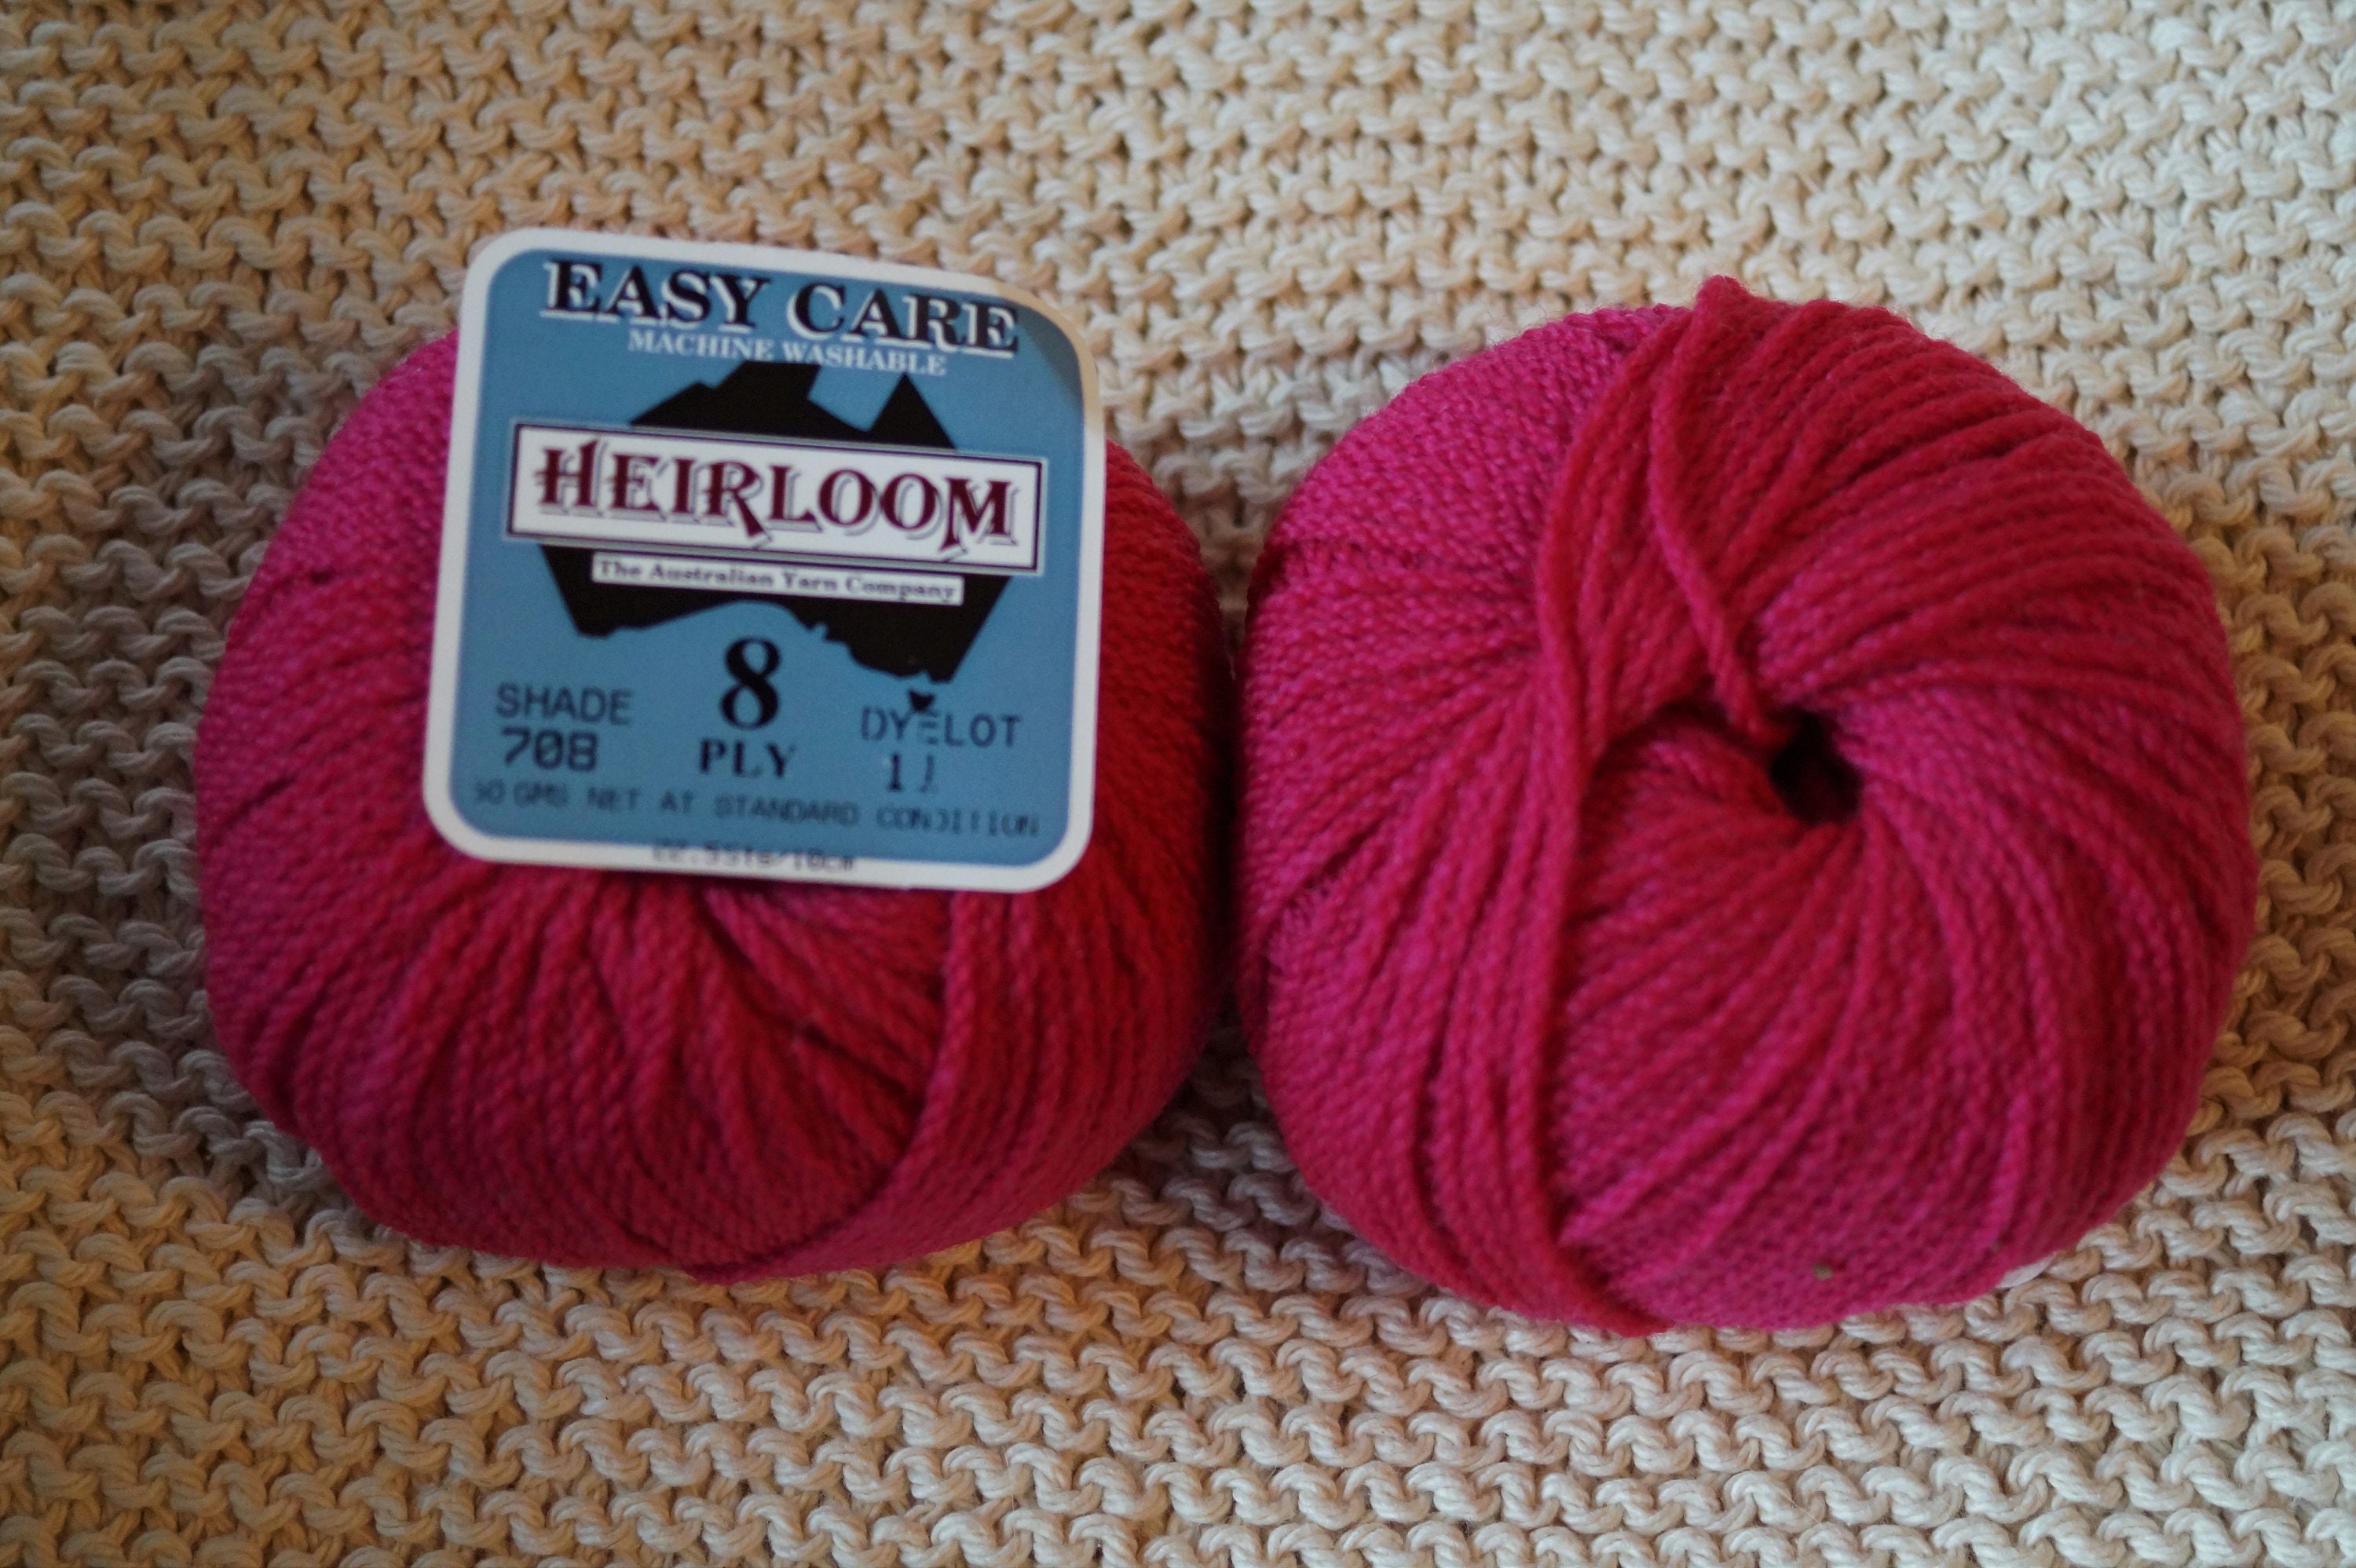 Super Saver, Easy Care, Machine Washable Yarn by Red Heart